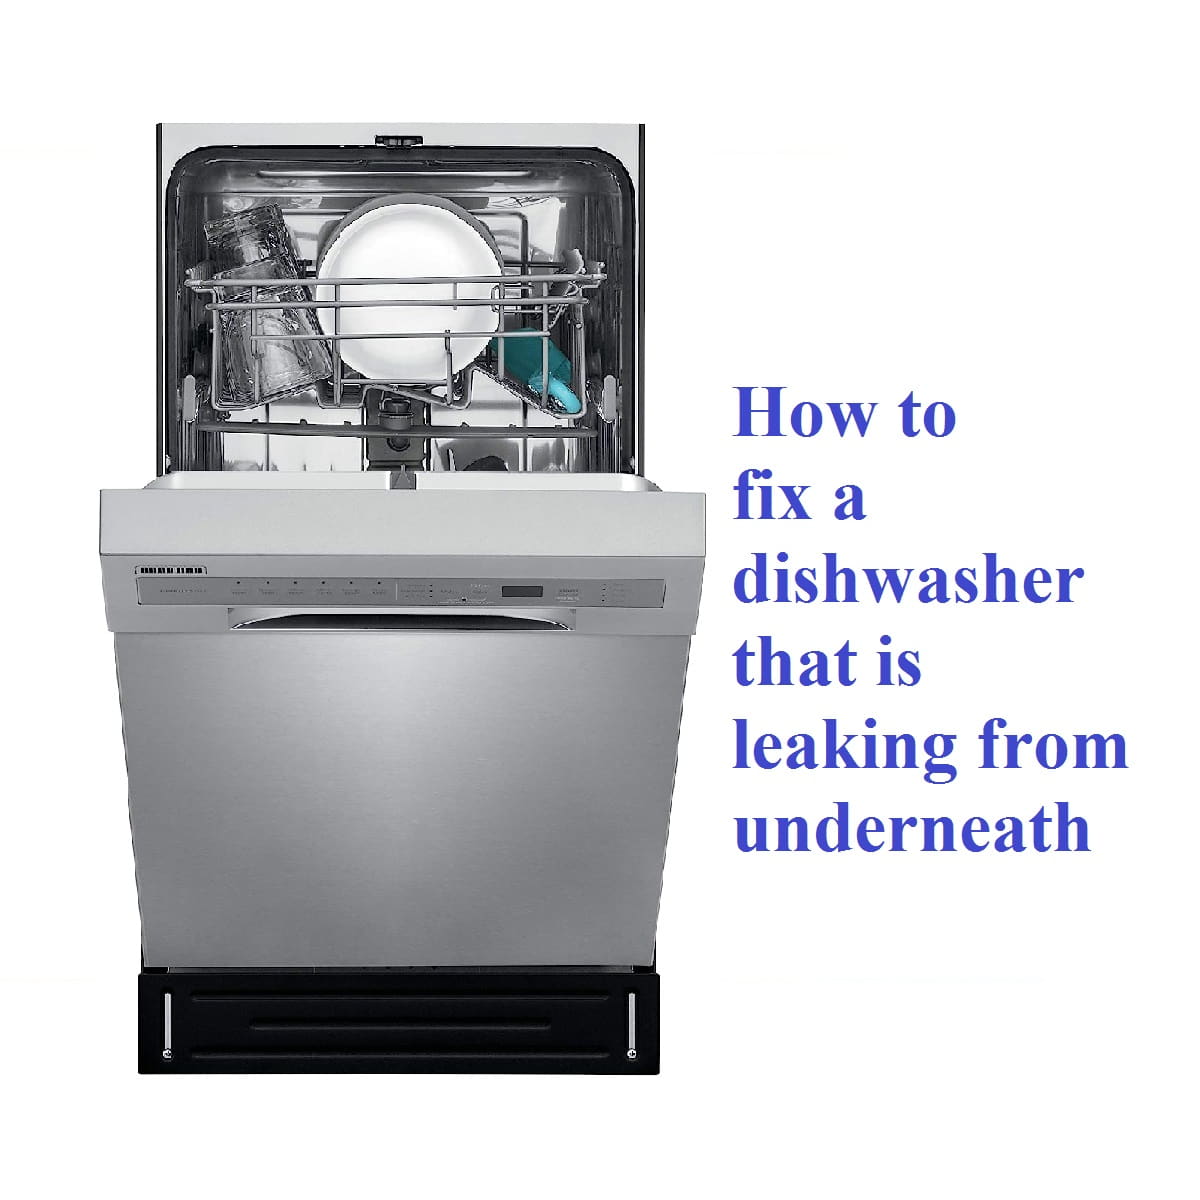 Why is my dishwasher leaking from underneath